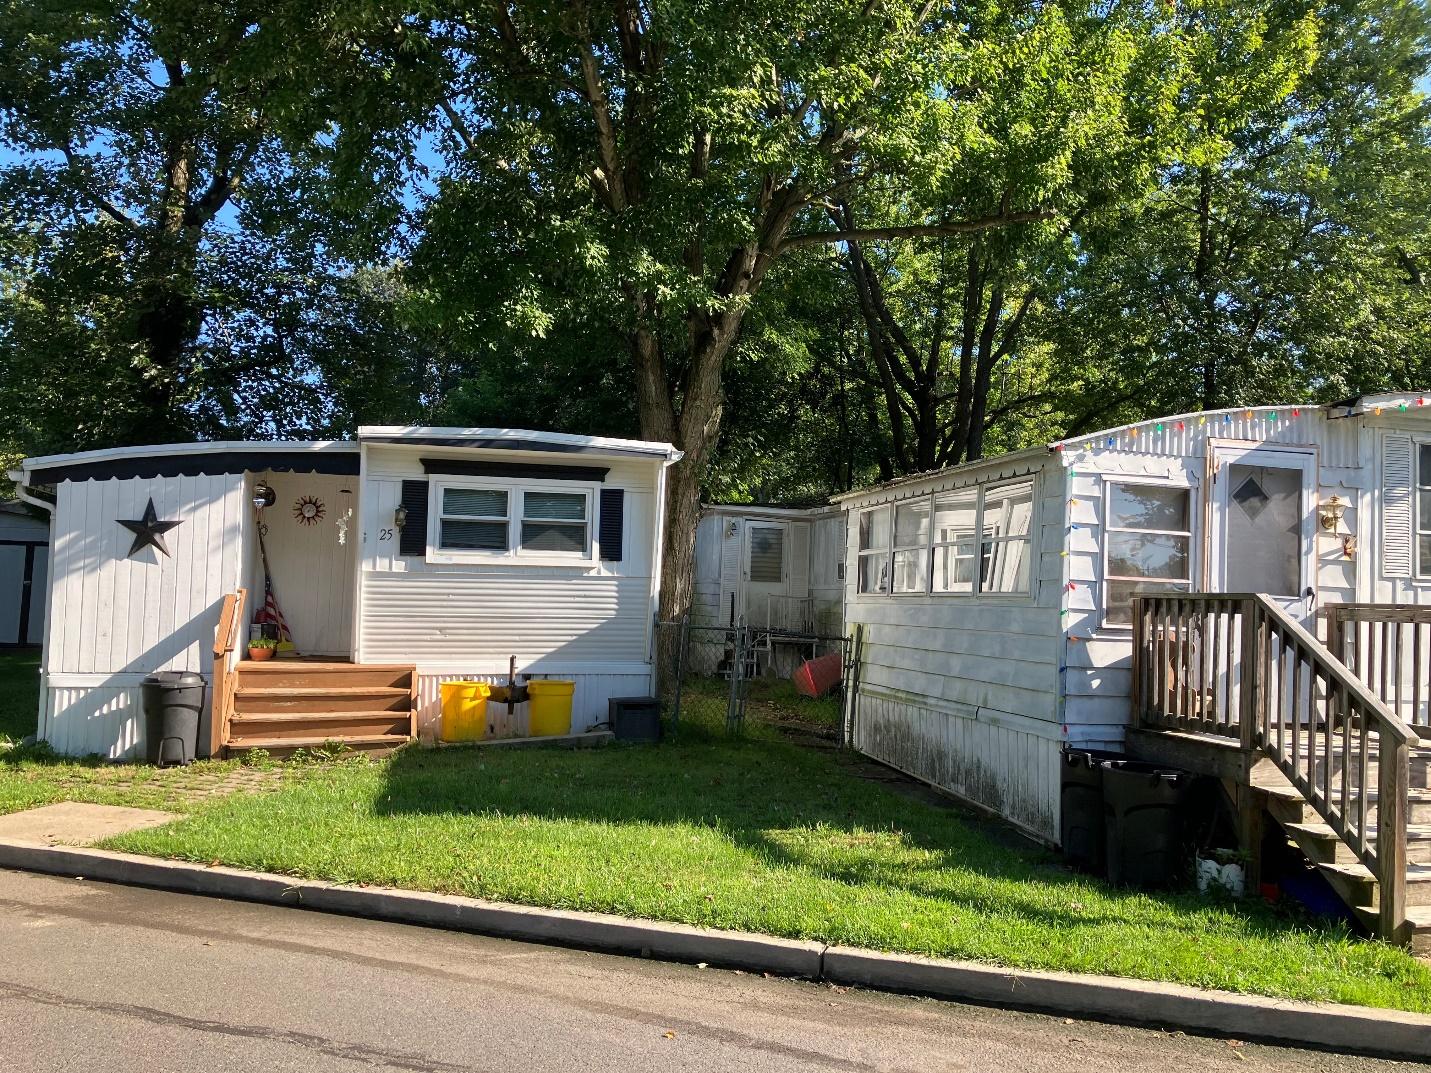 A trailer park with trees and a sidewalk

Description automatically generated with medium confidence